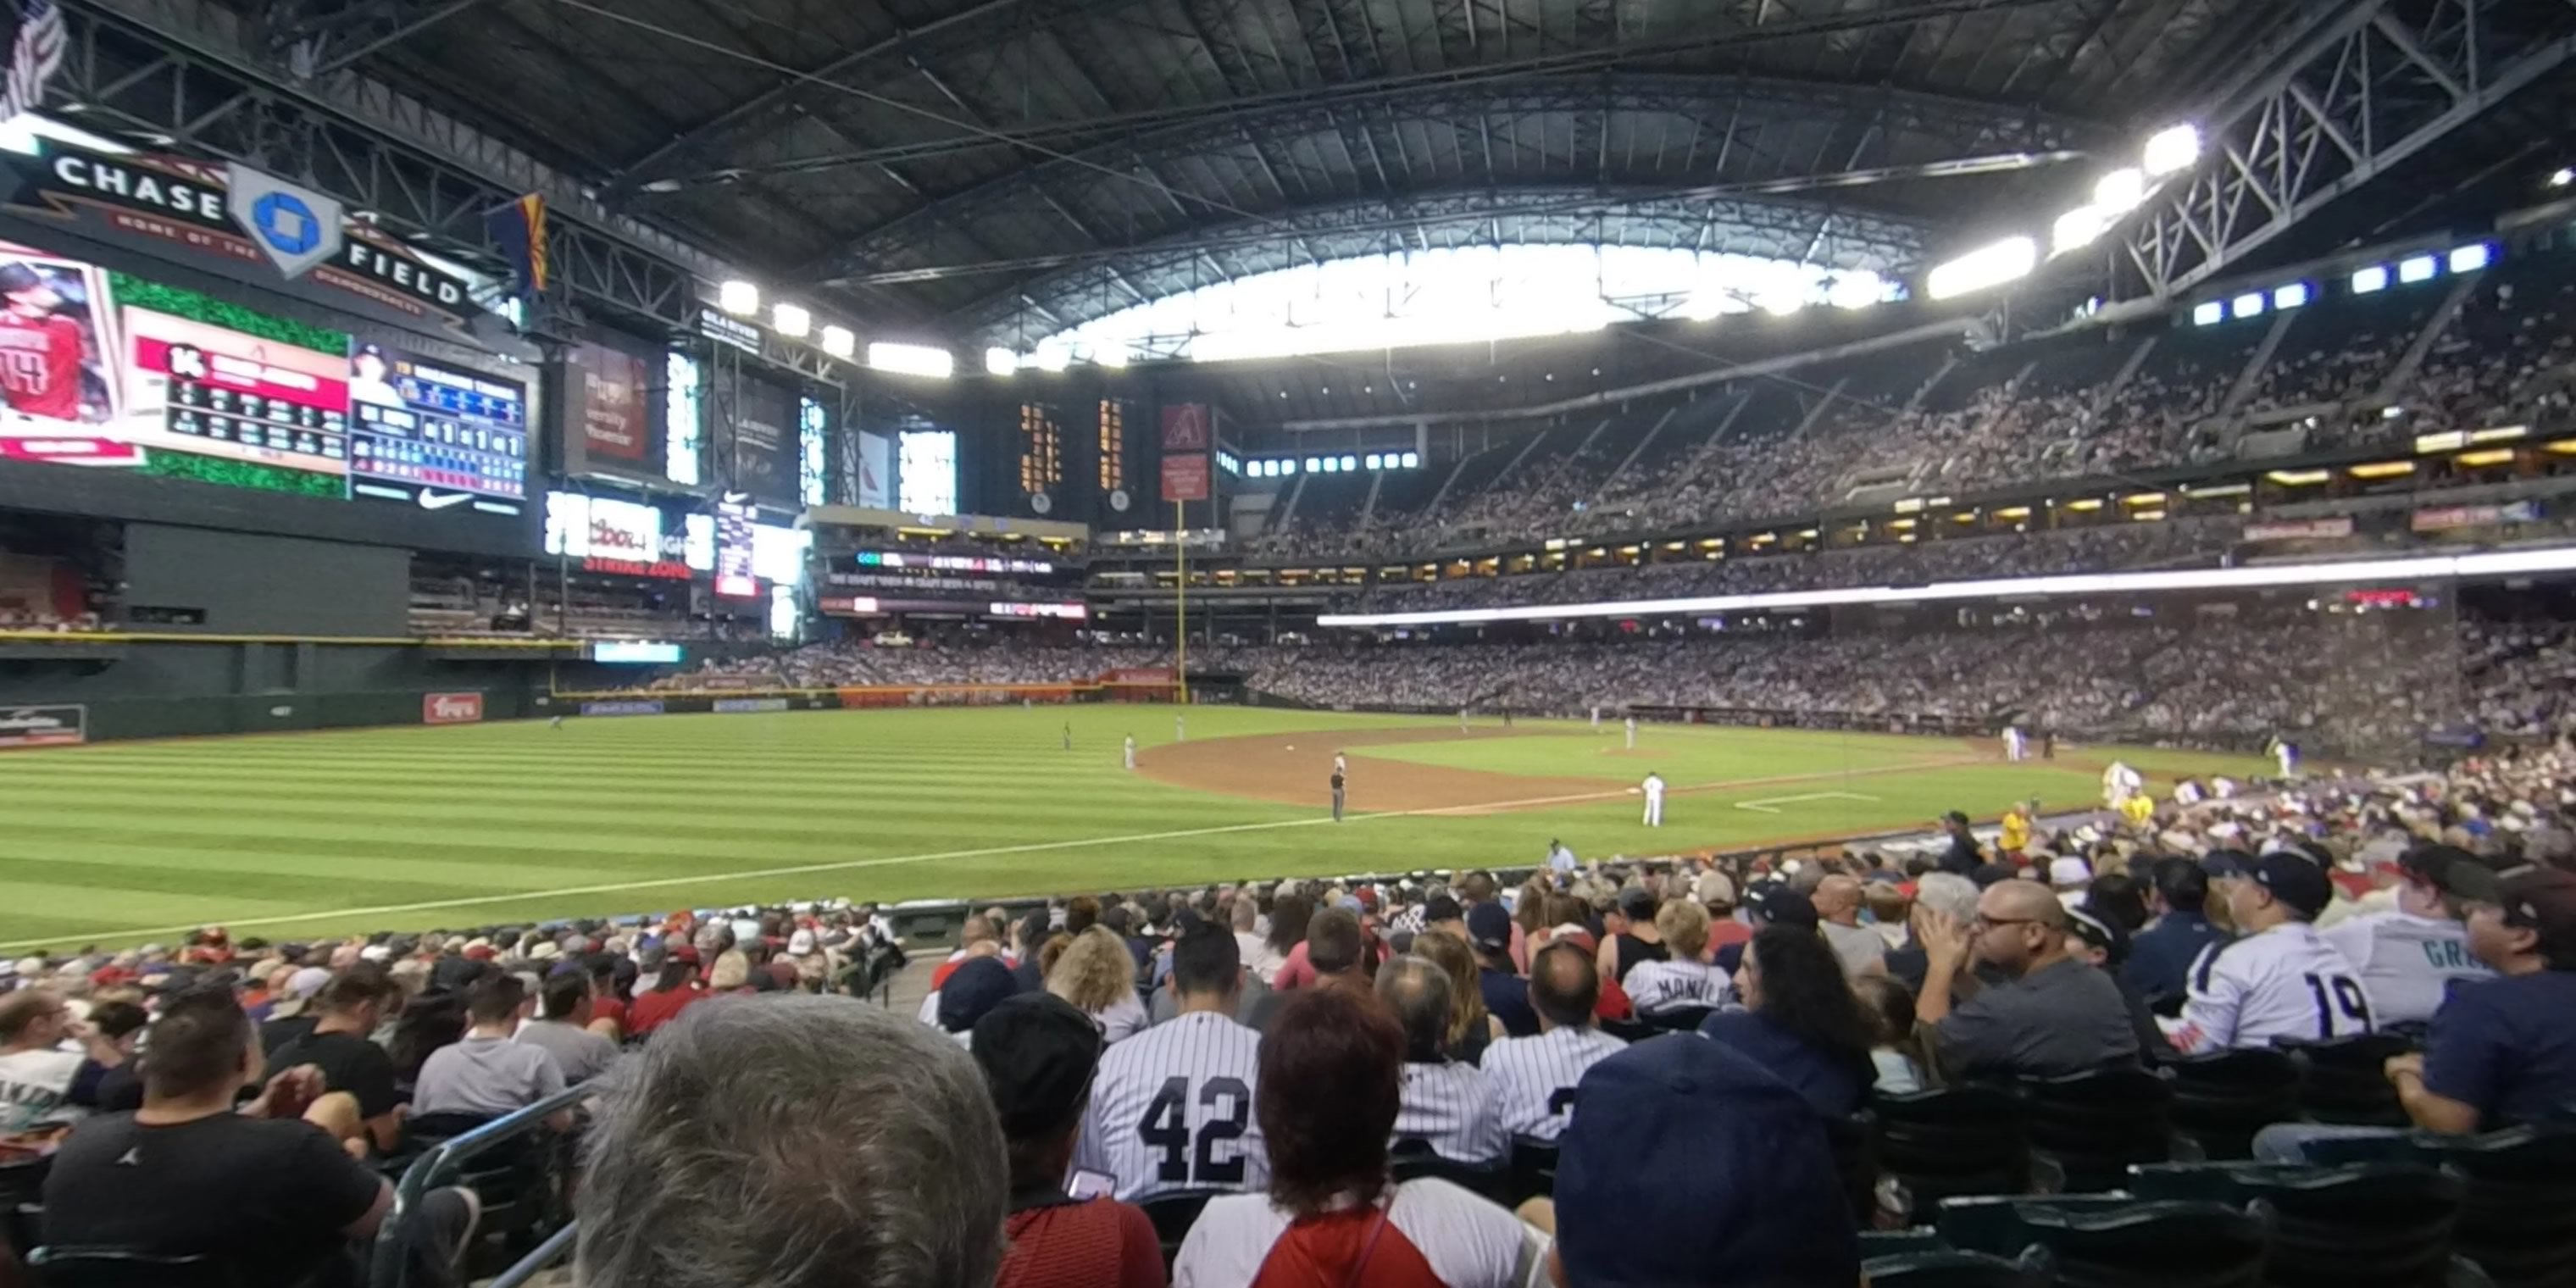 section 131 panoramic seat view  for baseball - chase field